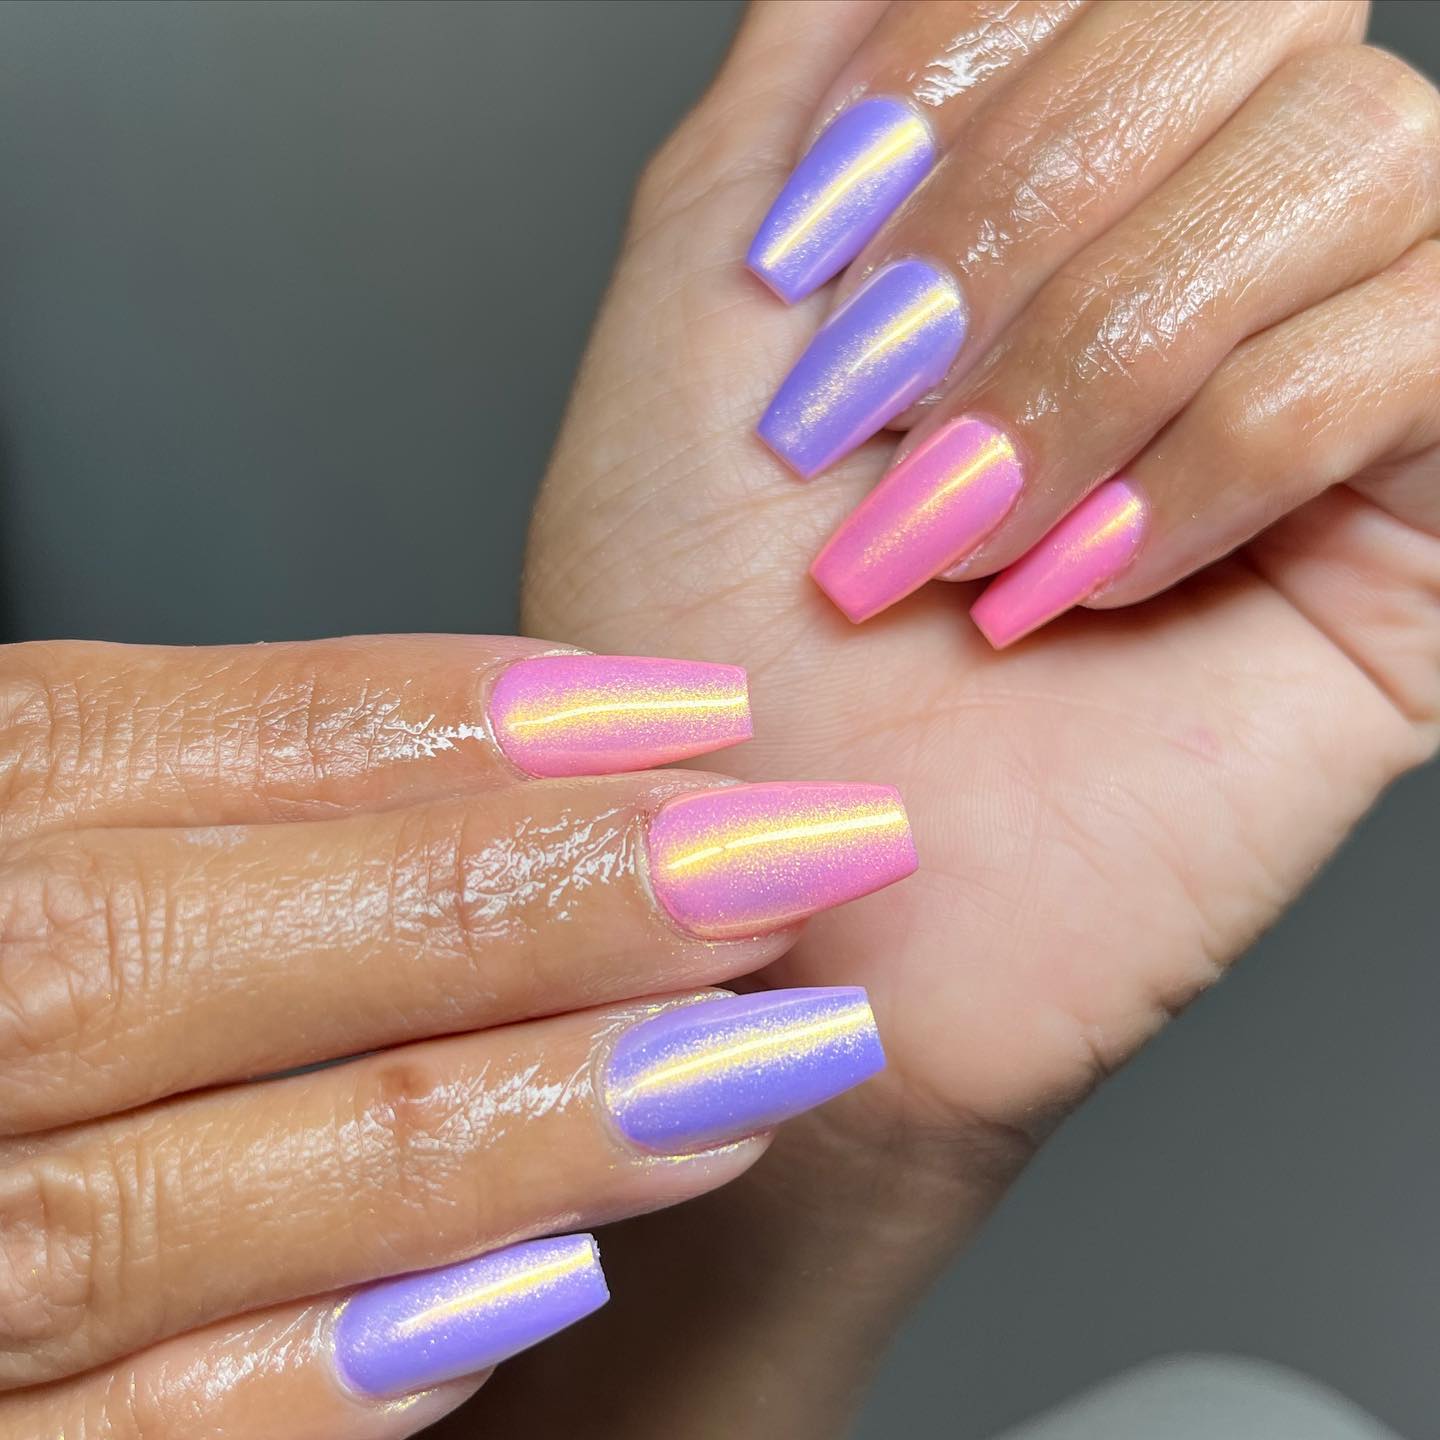 Baby pink and purple can be the cutest colors. You will feel like a baby with these perfect chrome nails.